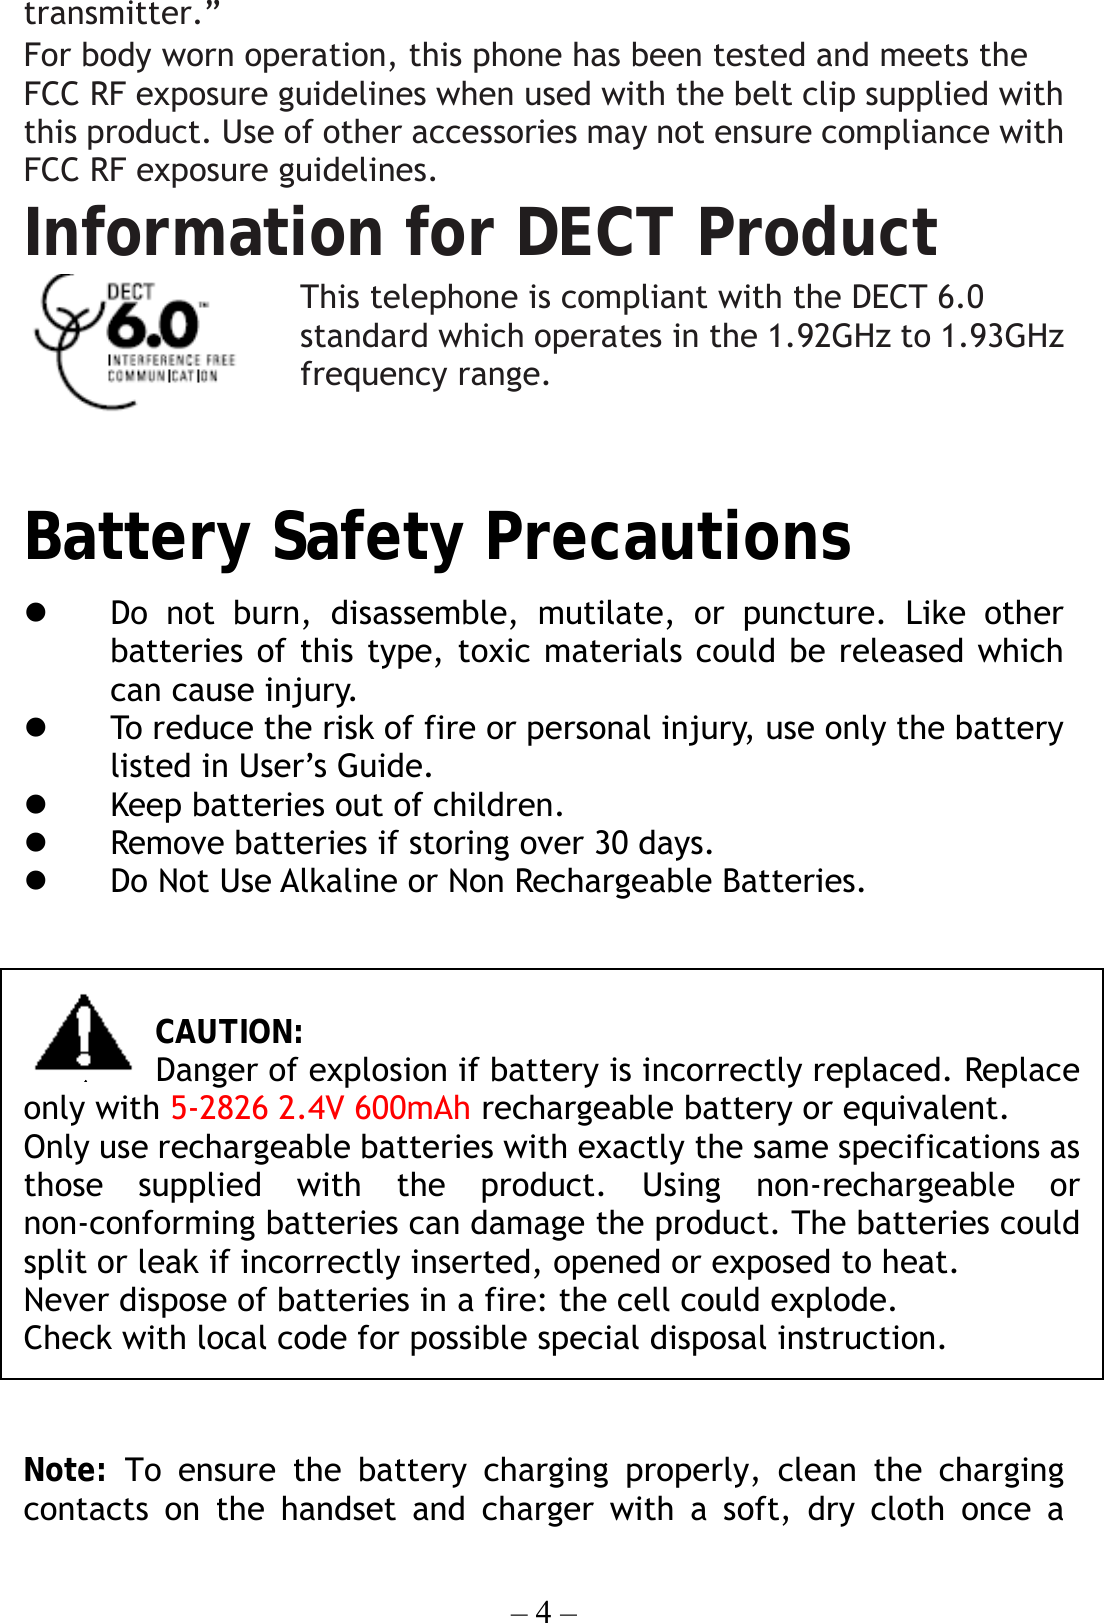 – 4 – transmitter.” For body worn operation, this phone has been tested and meets the FCC RF exposure guidelines when used with the belt clip supplied with this product. Use of other accessories may not ensure compliance with FCC RF exposure guidelines. Information for DECT Product This telephone is compliant with the DECT 6.0 standard which operates in the 1.92GHz to 1.93GHz frequency range.  Battery Safety Precautions            Do not burn, disassemble, mutilate, or puncture. Like other batteries of this type, toxic materials could be released which can cause injury.   To reduce the risk of fire or personal injury, use only the battery listed in User’s Guide.   Keep batteries out of children.   Remove batteries if storing over 30 days.   Do Not Use Alkaline or Non Rechargeable Batteries.   CAUTION: Danger of explosion if battery is incorrectly replaced. Replace only with 5-2826 2.4V 600mAh rechargeable battery or equivalent. Only use rechargeable batteries with exactly the same specifications as those supplied with the product. Using non-rechargeable or non-conforming batteries can damage the product. The batteries could split or leak if incorrectly inserted, opened or exposed to heat. Never dispose of batteries in a fire: the cell could explode. Check with local code for possible special disposal instruction.  Note: To ensure the battery charging properly, clean the charging contacts on the handset and charger with a soft, dry cloth once a 